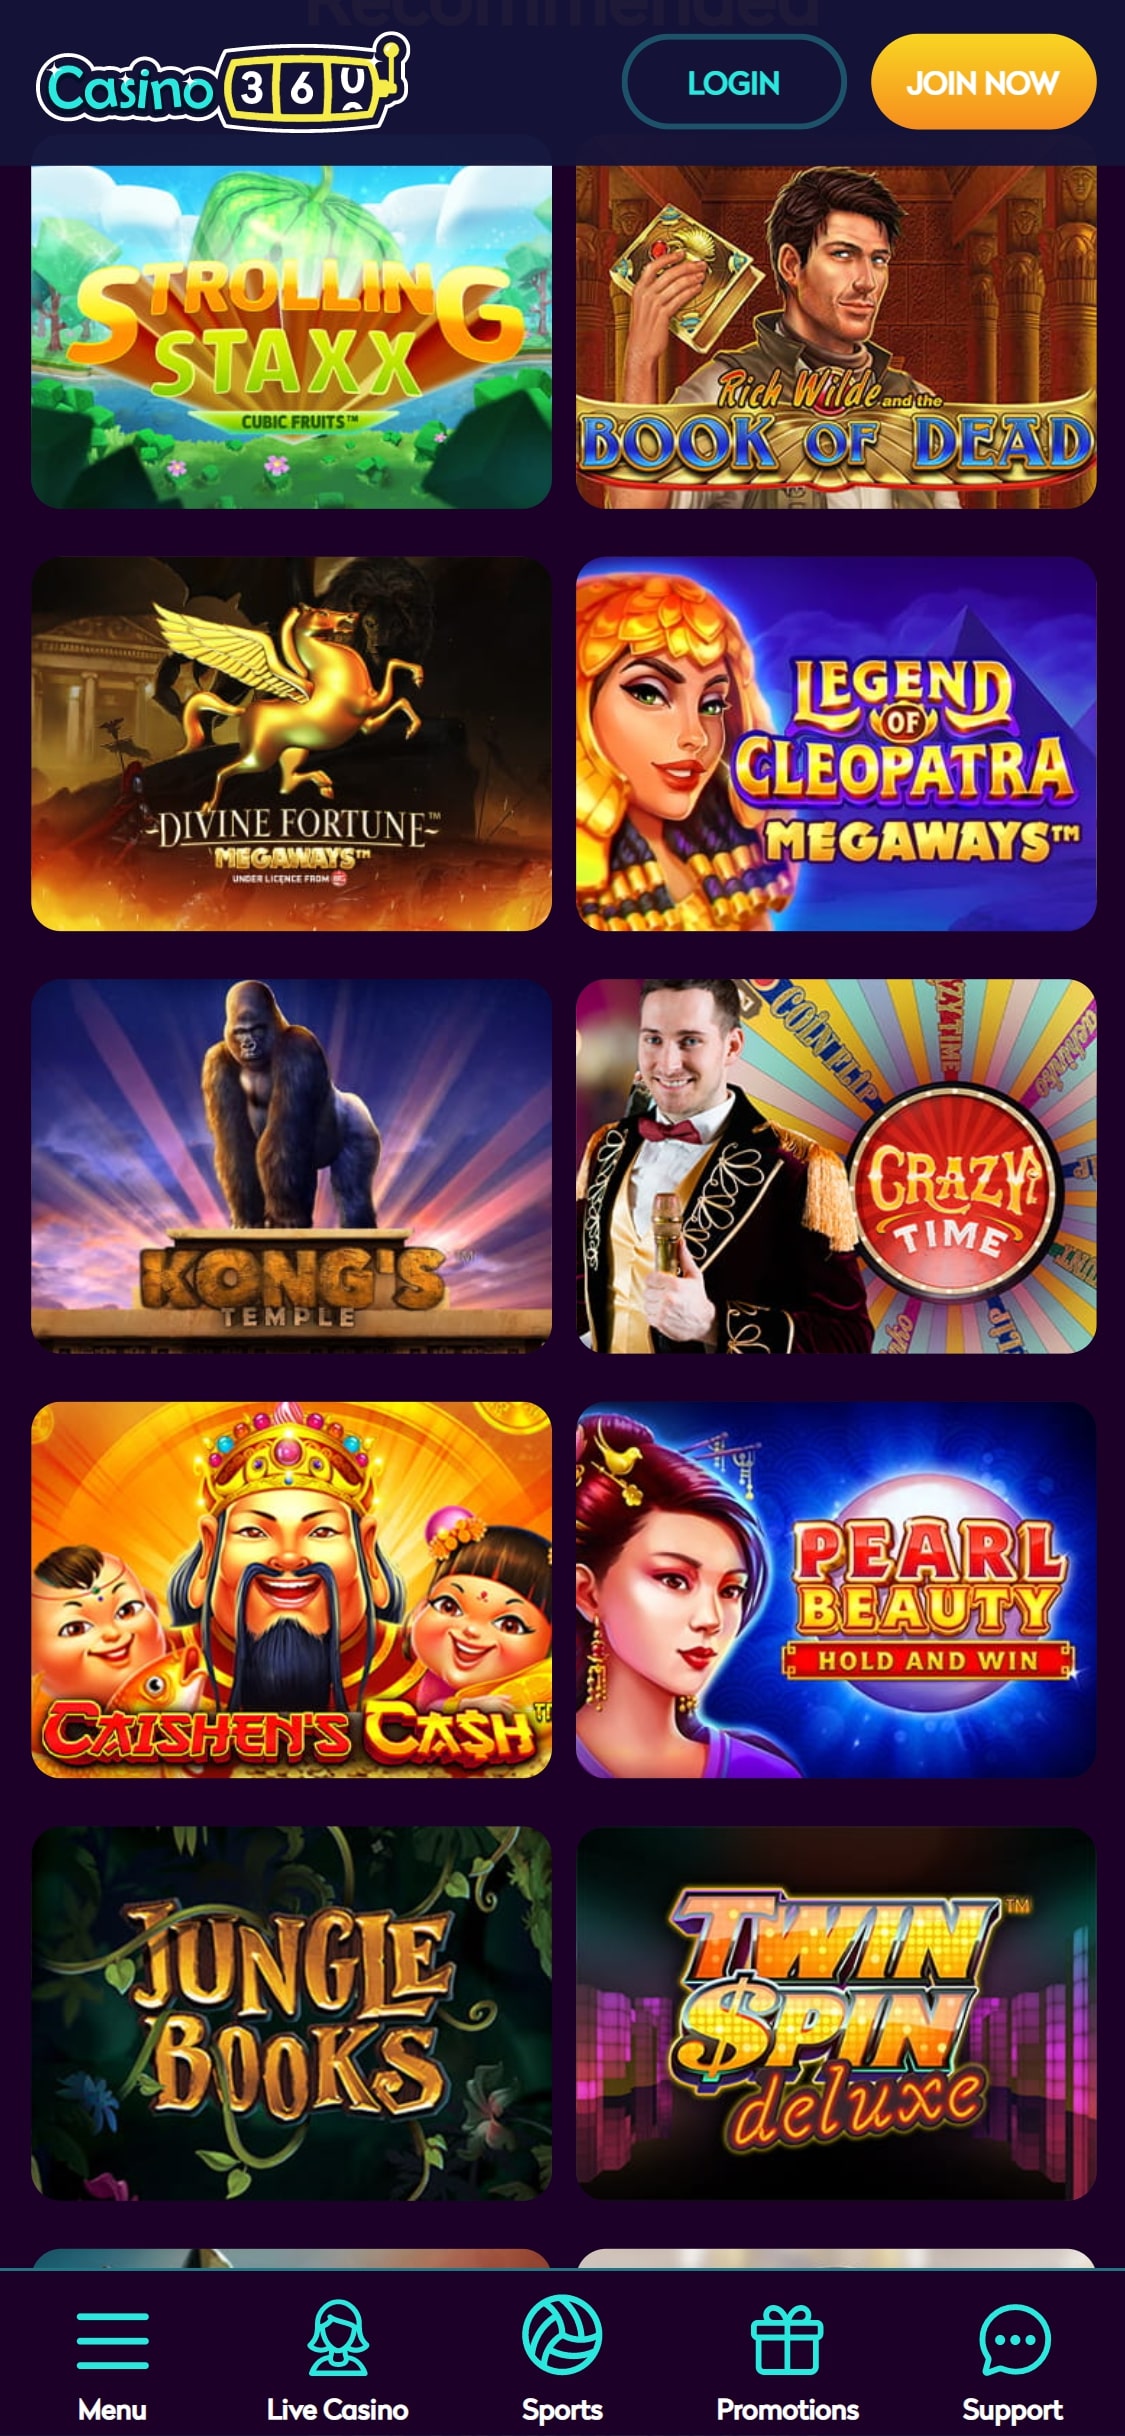 Casino360 Mobile Games Review